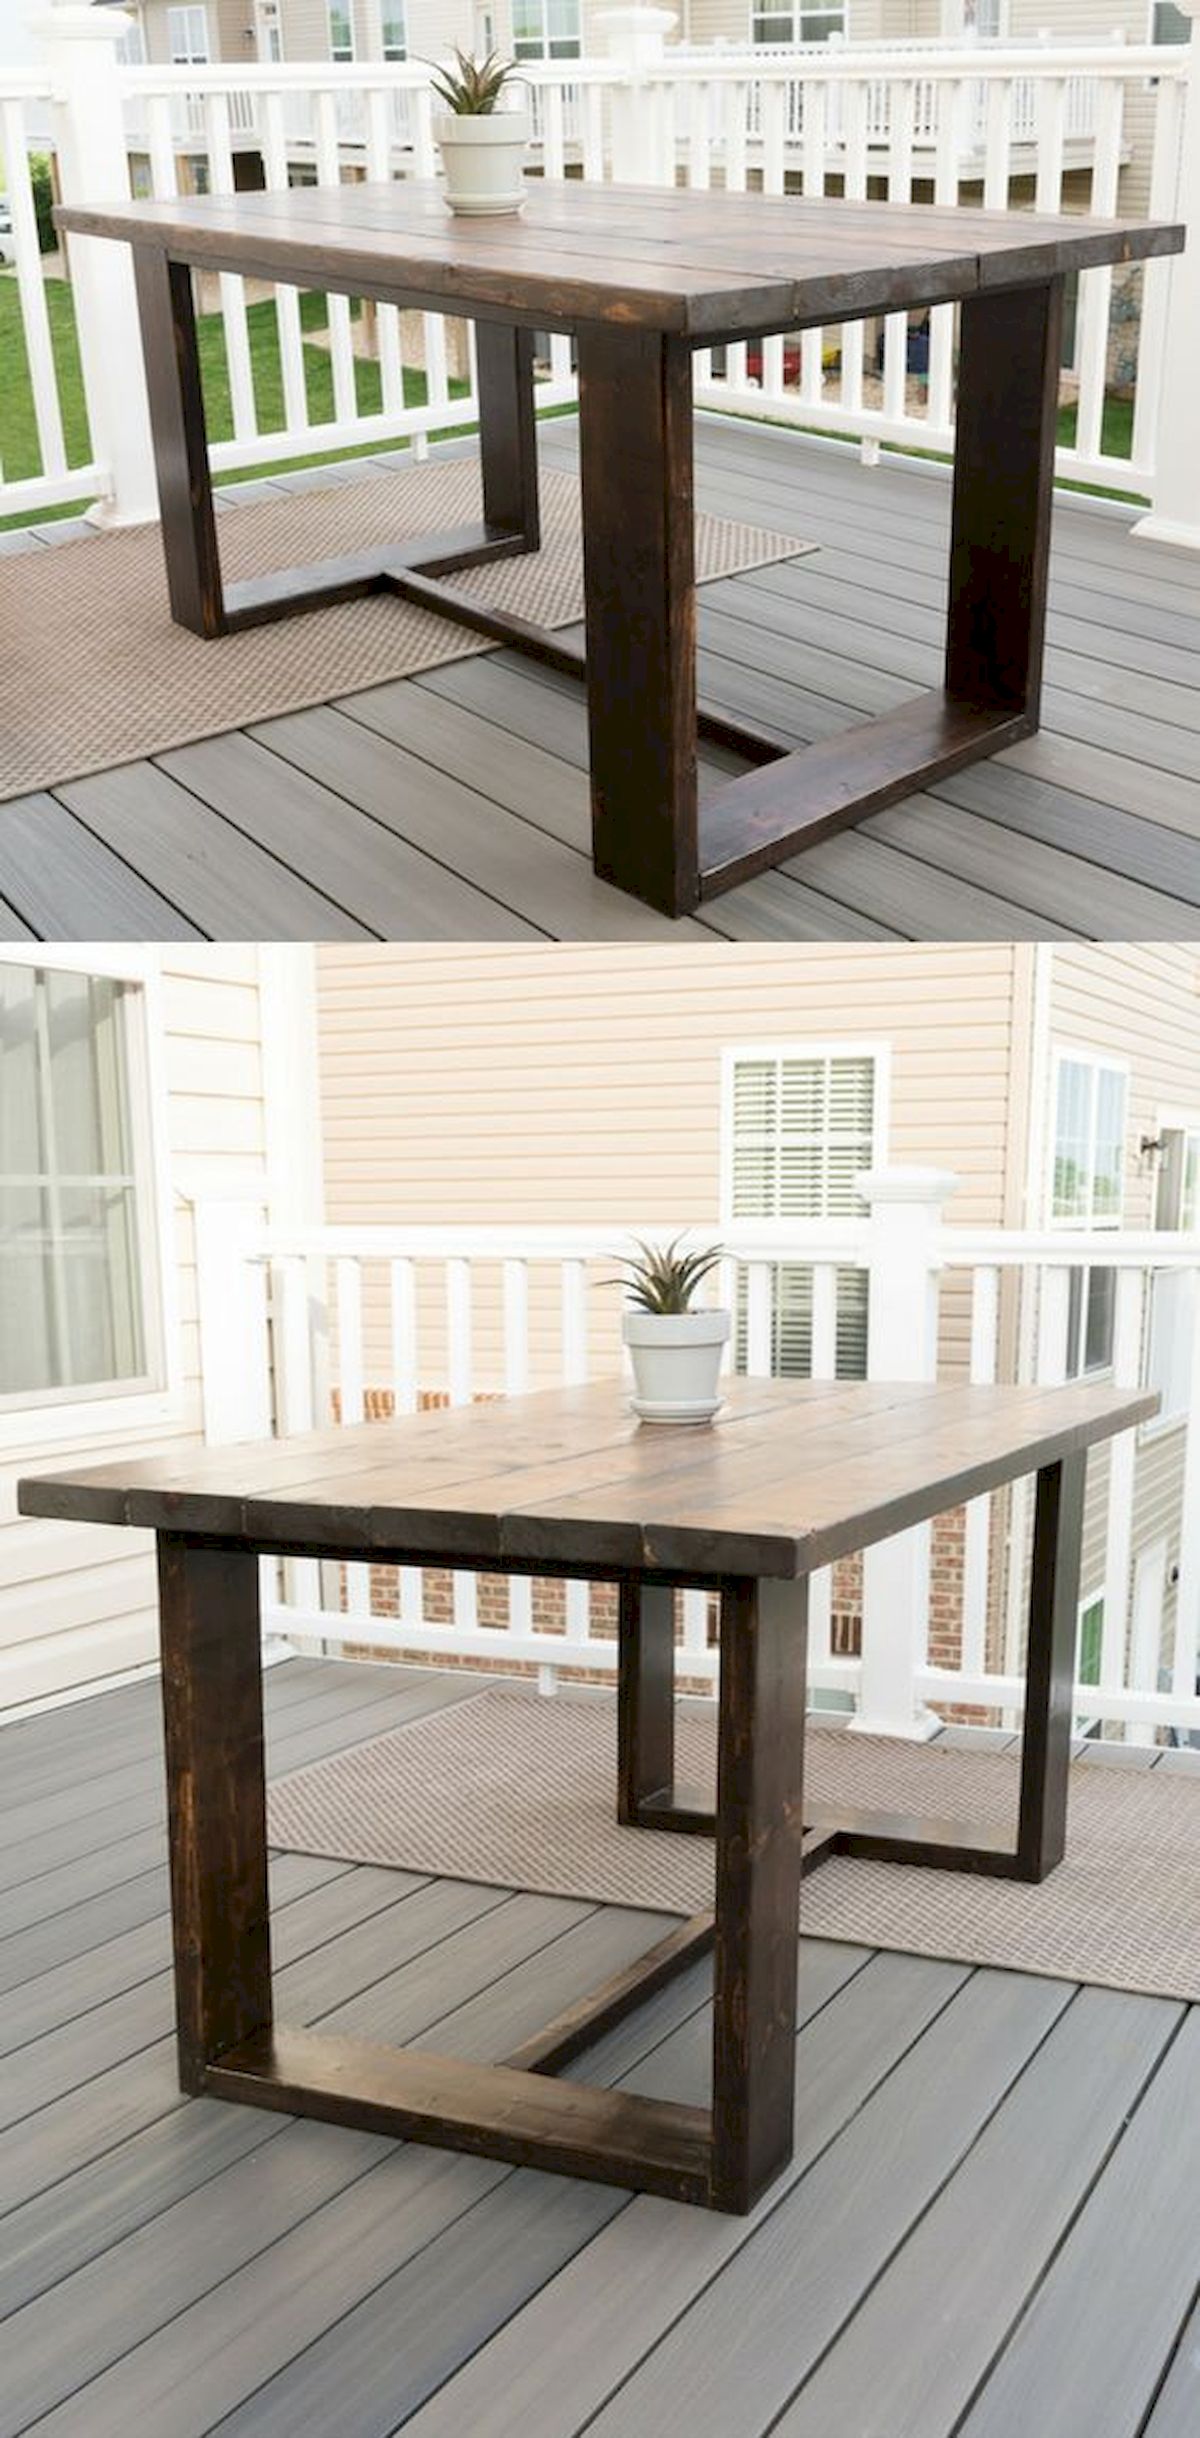 50 Amazing DIY Projects Outdoor Furniture Design Ideas (22)